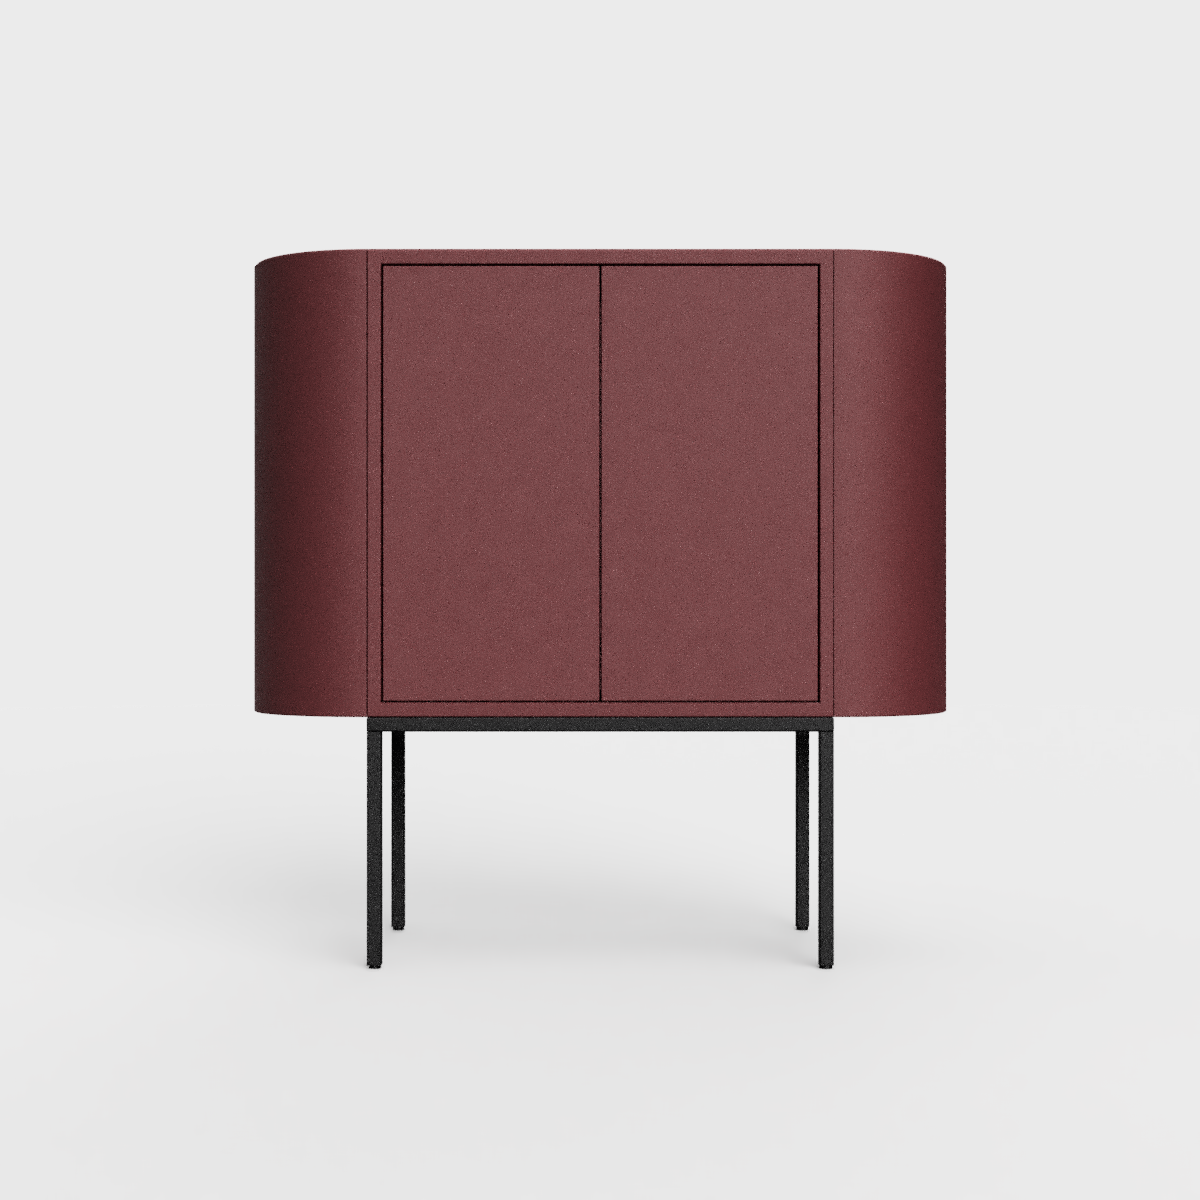 Siena 01 Sideboard in burgundy blue color, powder-coated steel, elegant and modern piece of furniture for your living room